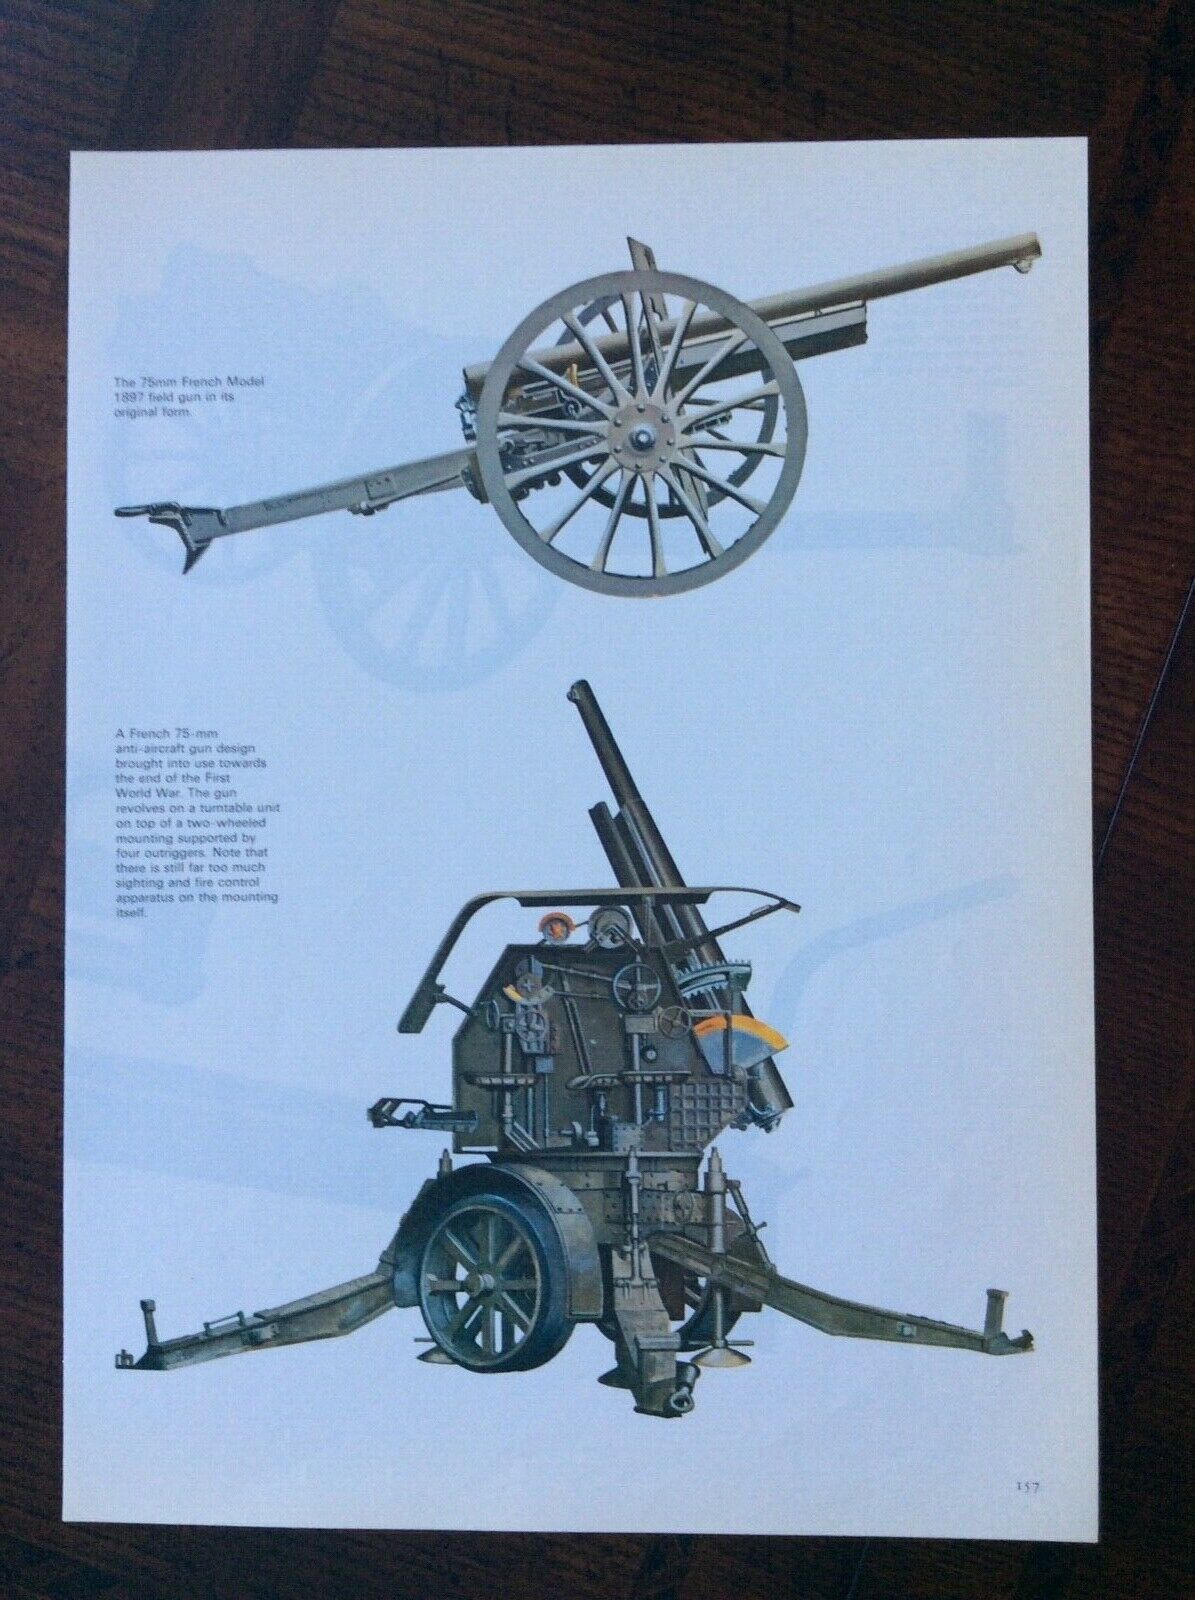 1974 vintage original book illustration Military Weapons History - Anti Aircraft